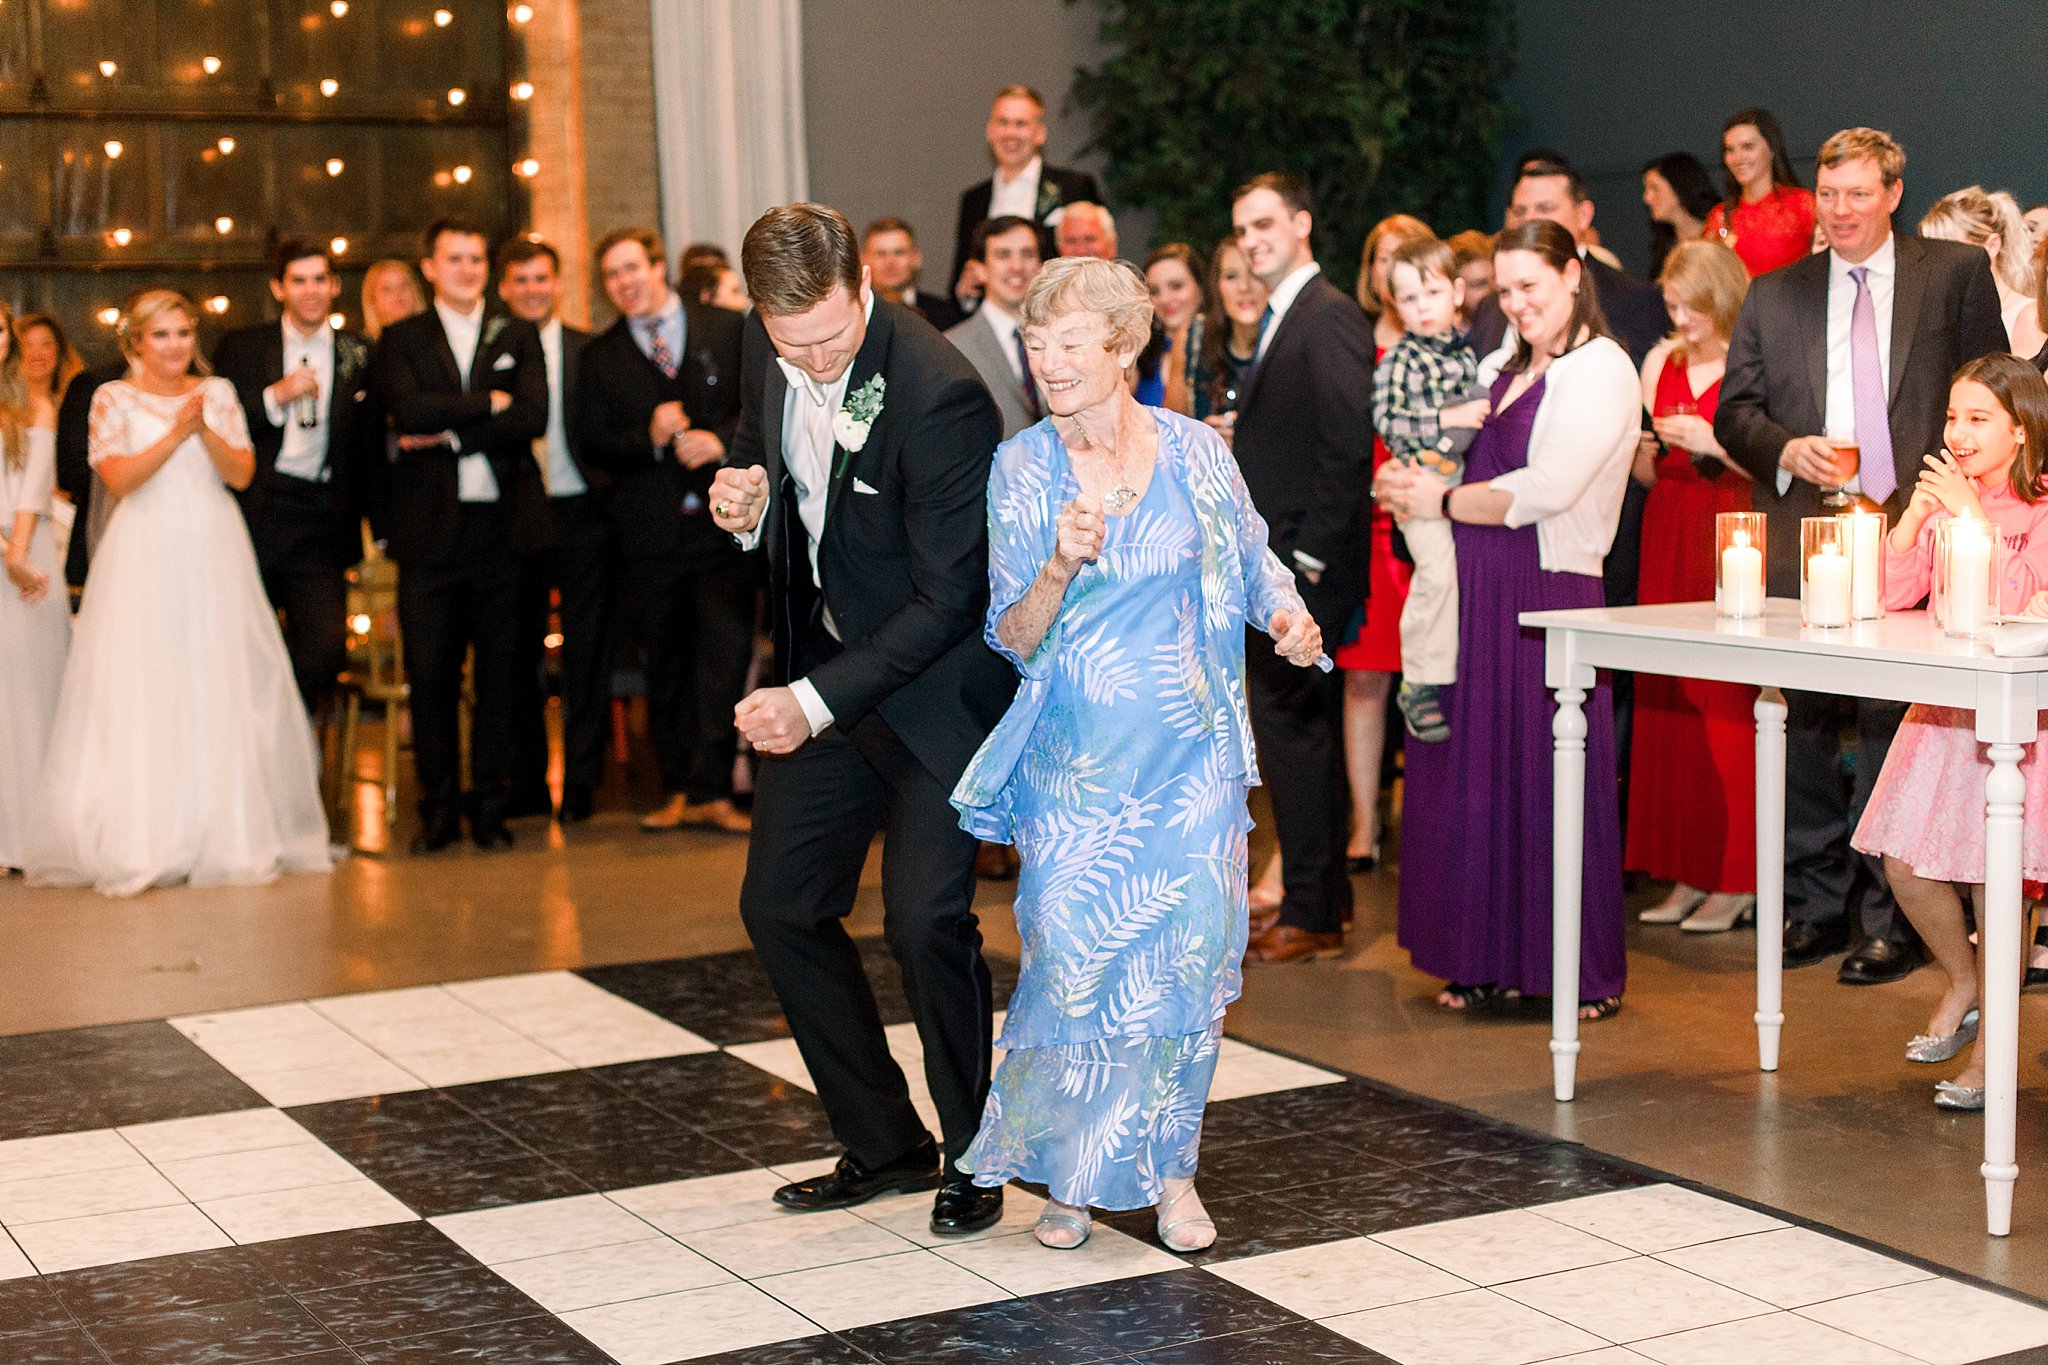 Groom's dance with Grandmother at wedding reception.